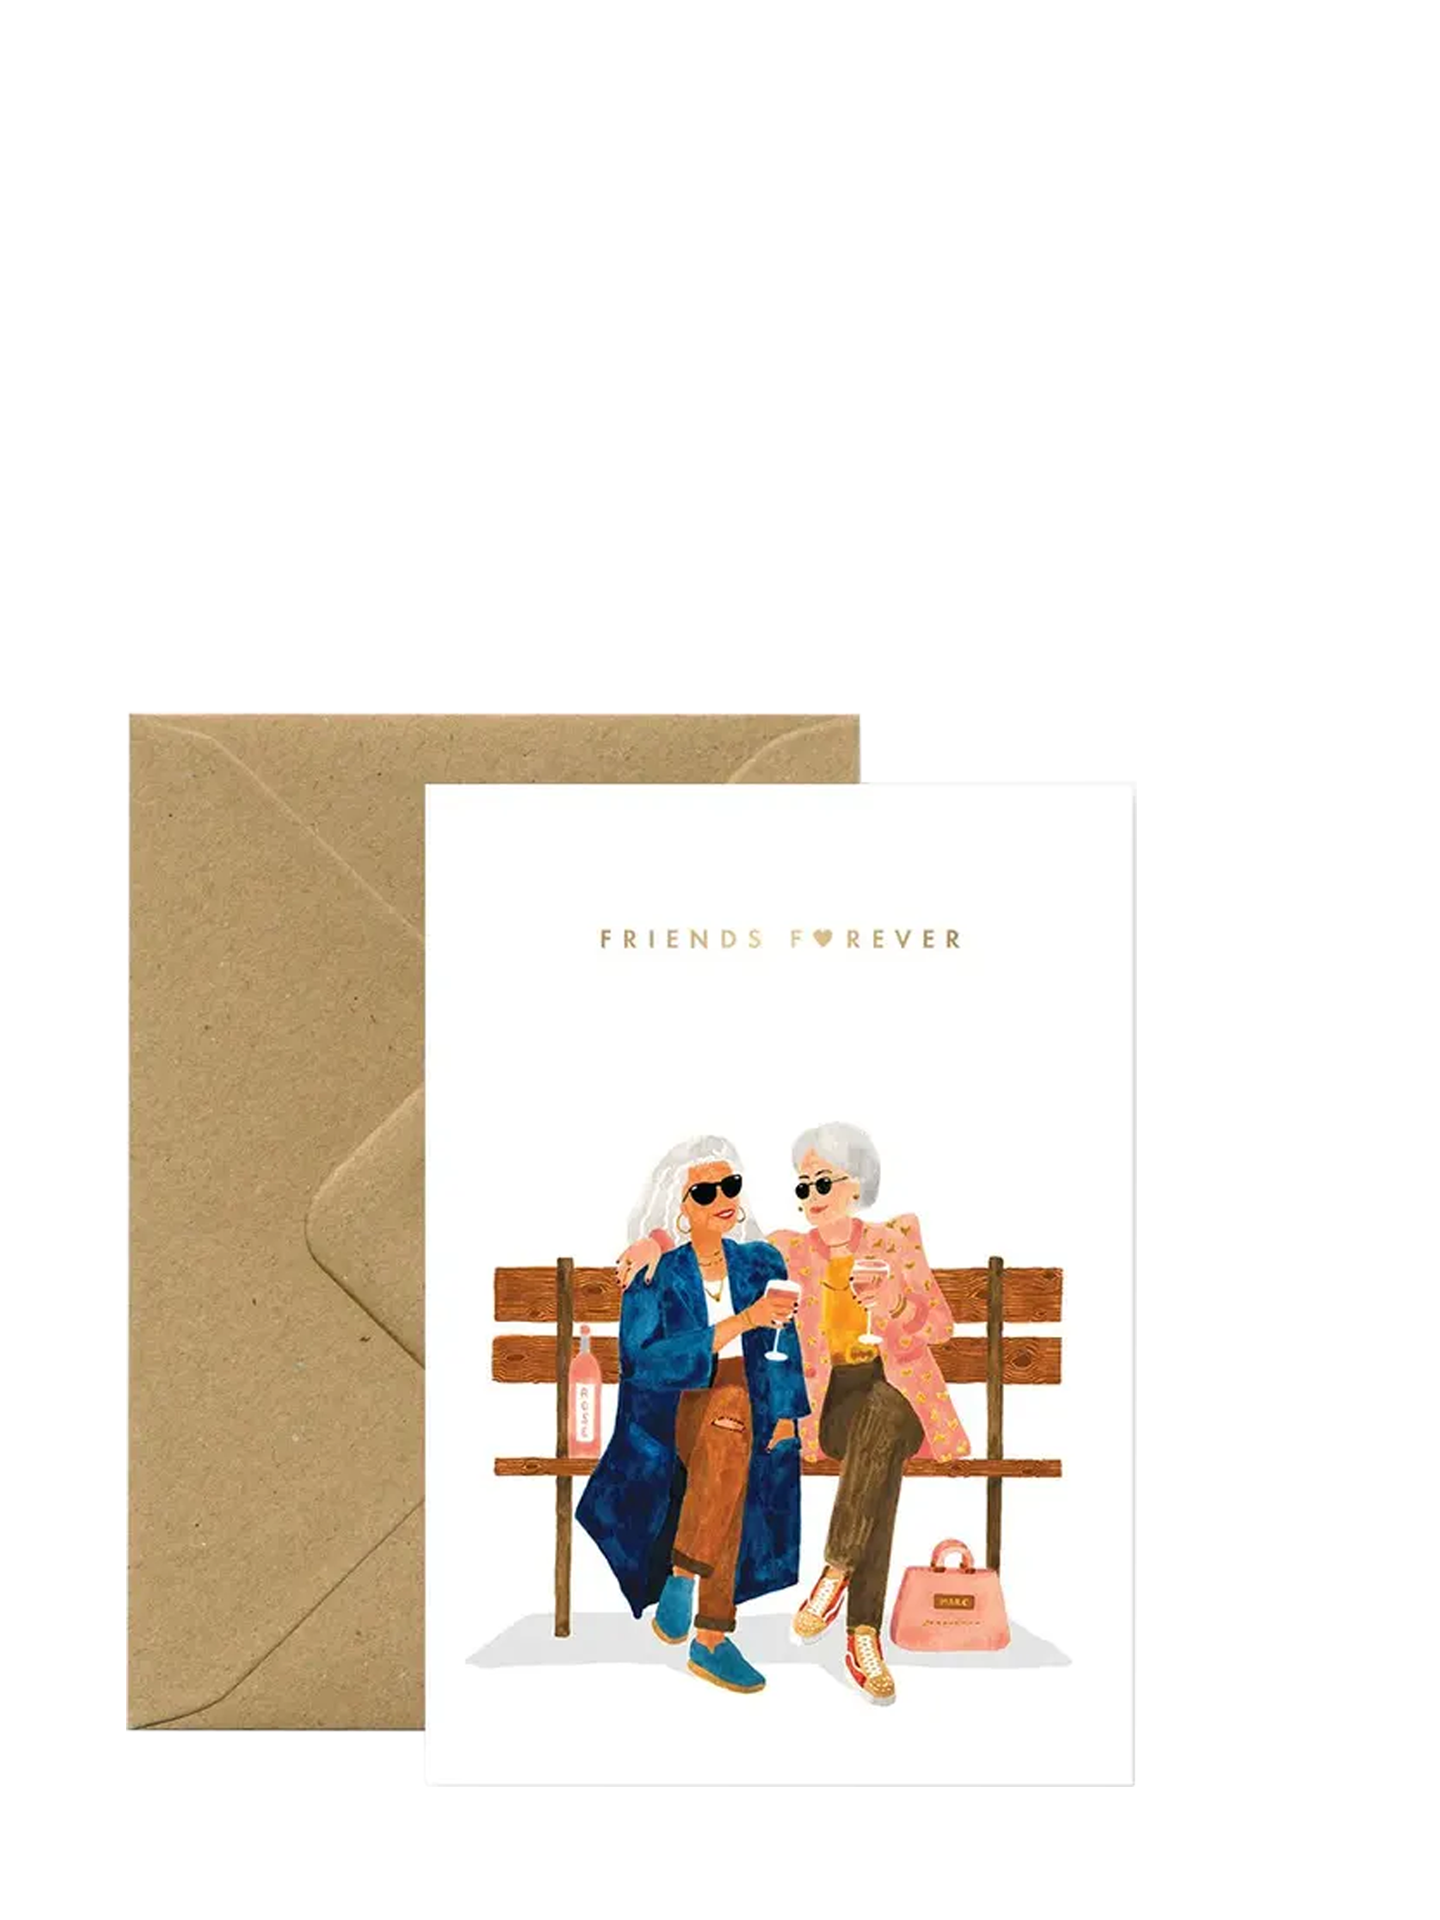 Old but cool sitting together 'Friends Forever' friendship card